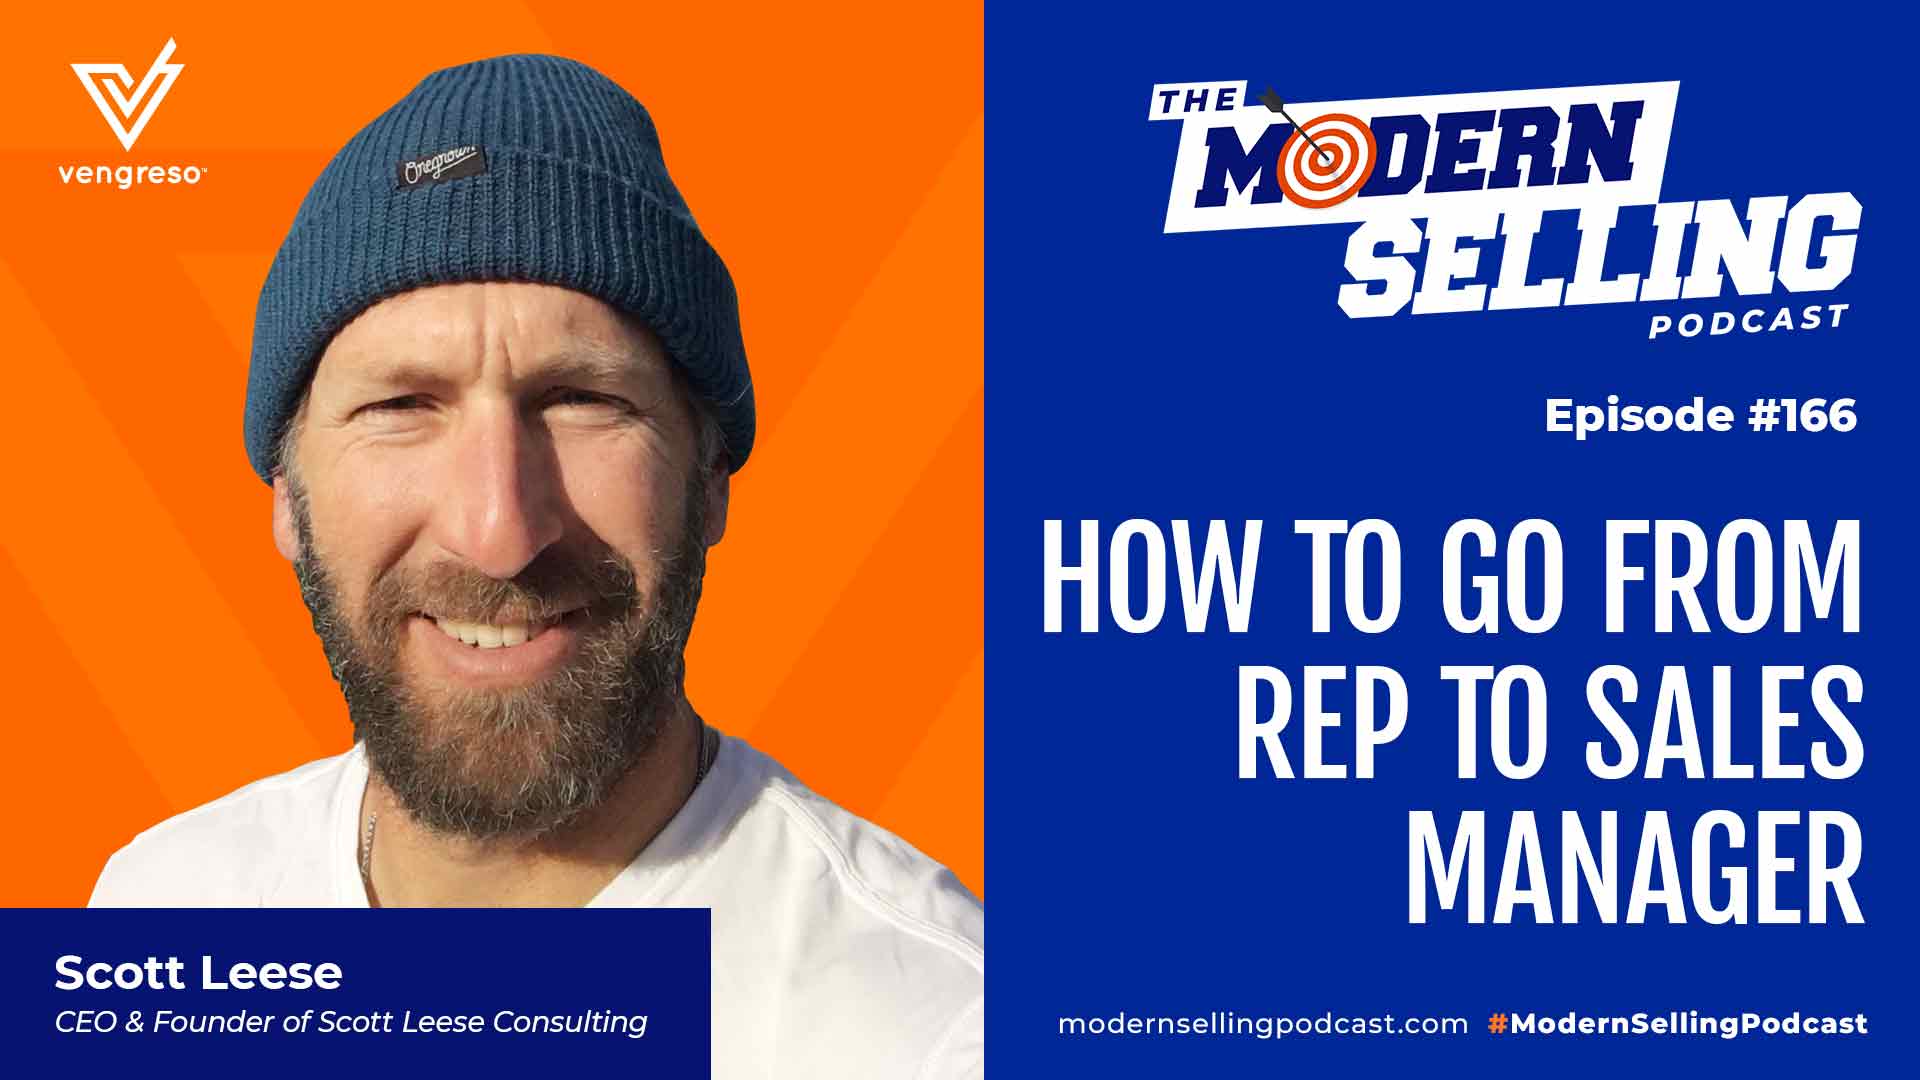 How to Go From Rep to Sales Manager with Scott Leese, #166